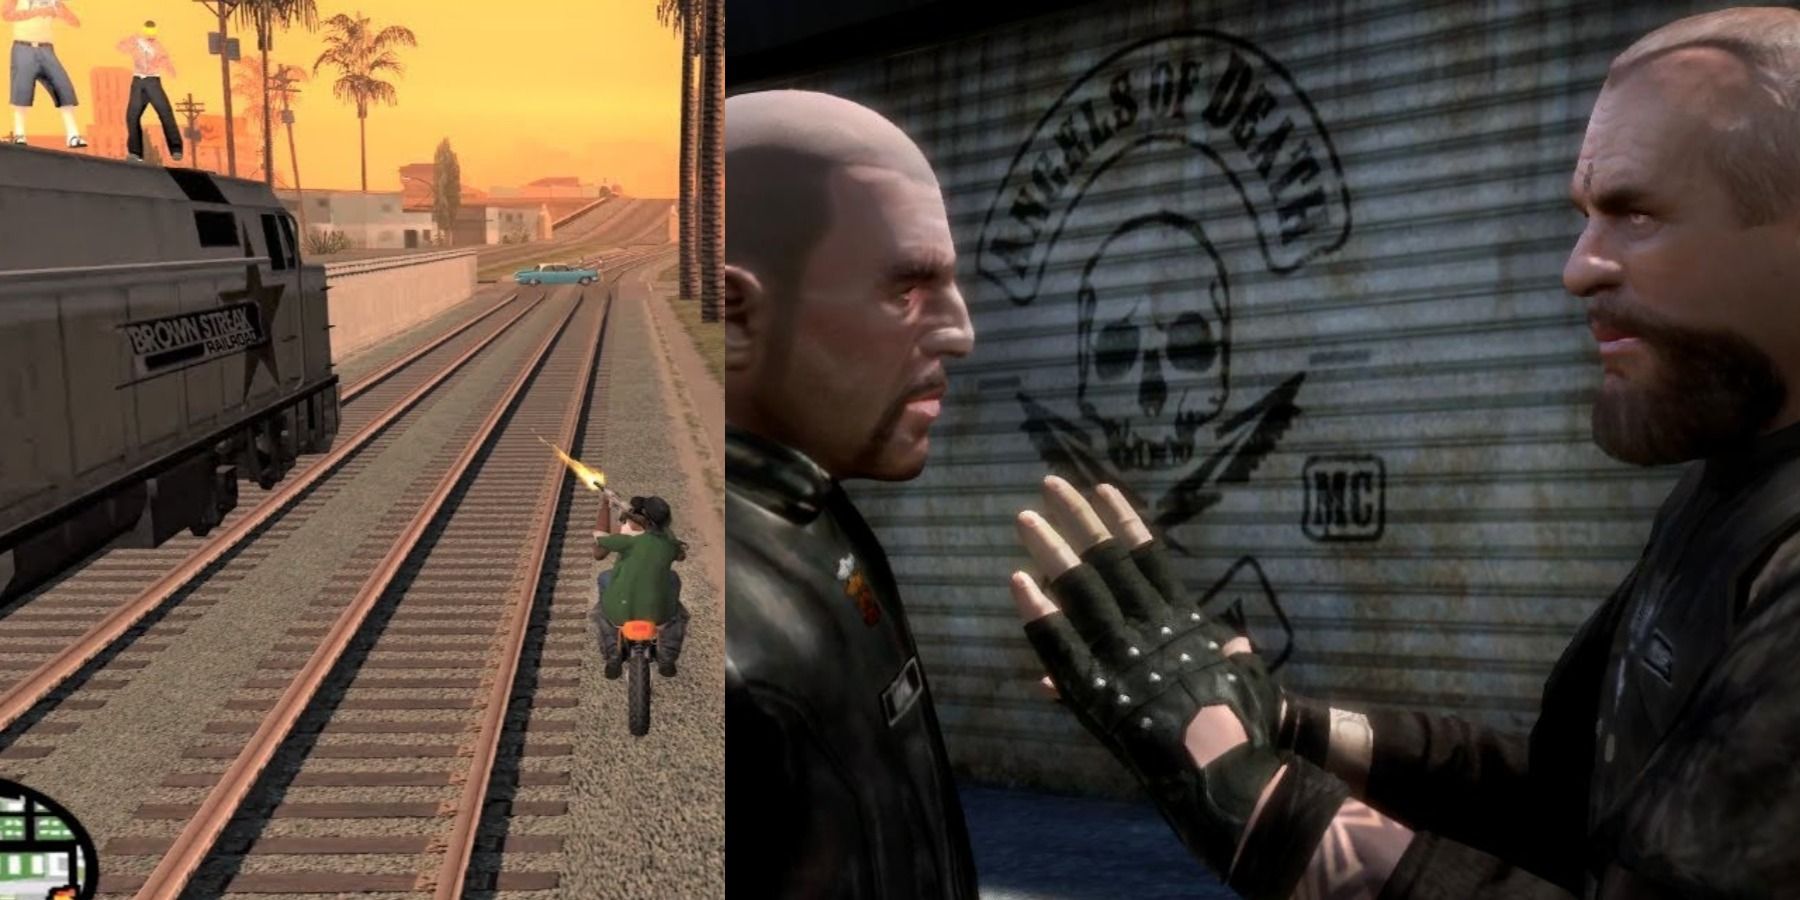 why does gta the lost and damned look like crap